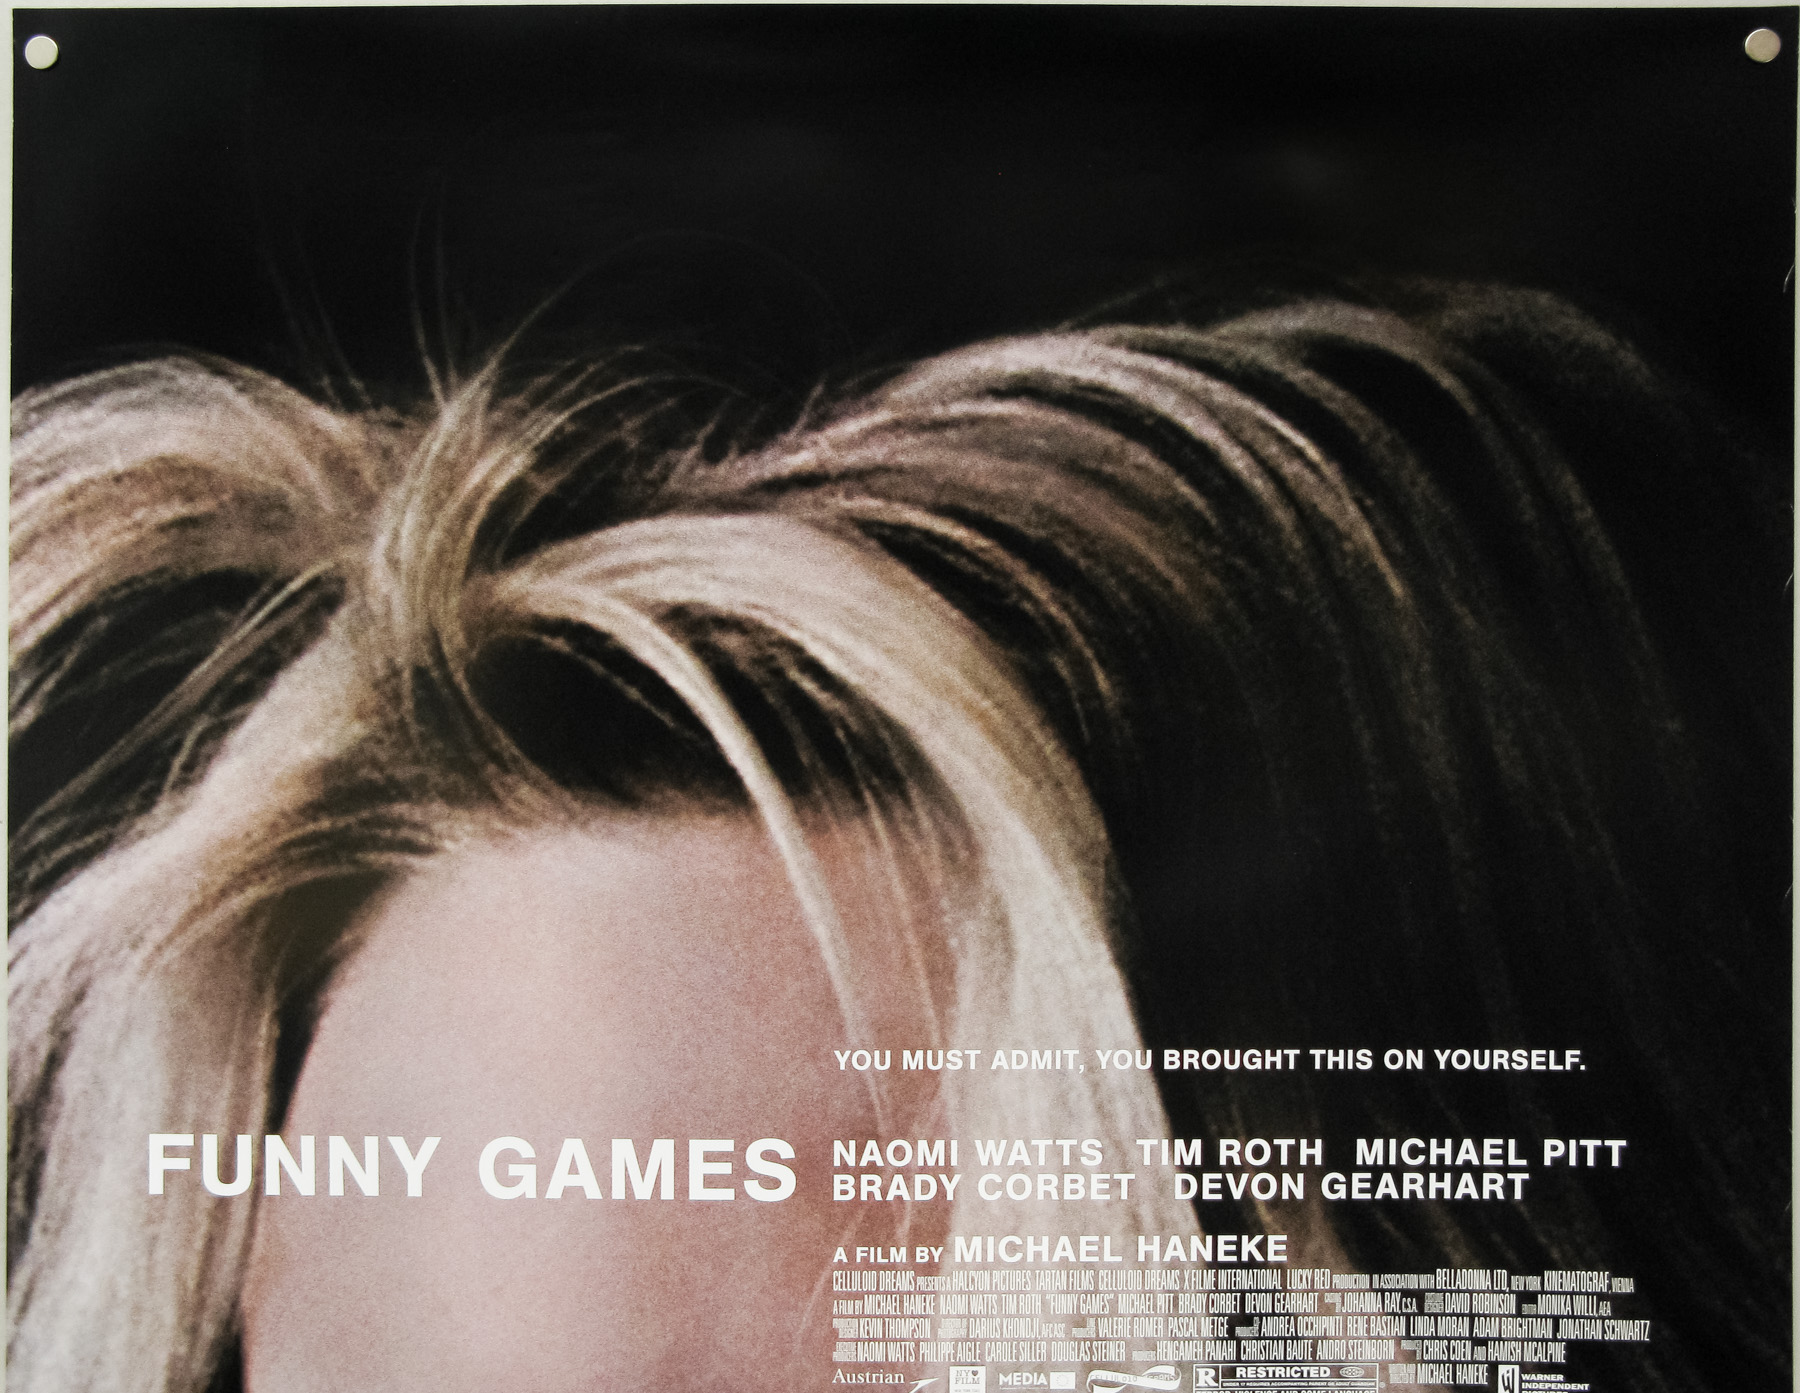 Funny Games U.S. 27x40 Movie Poster (2007)